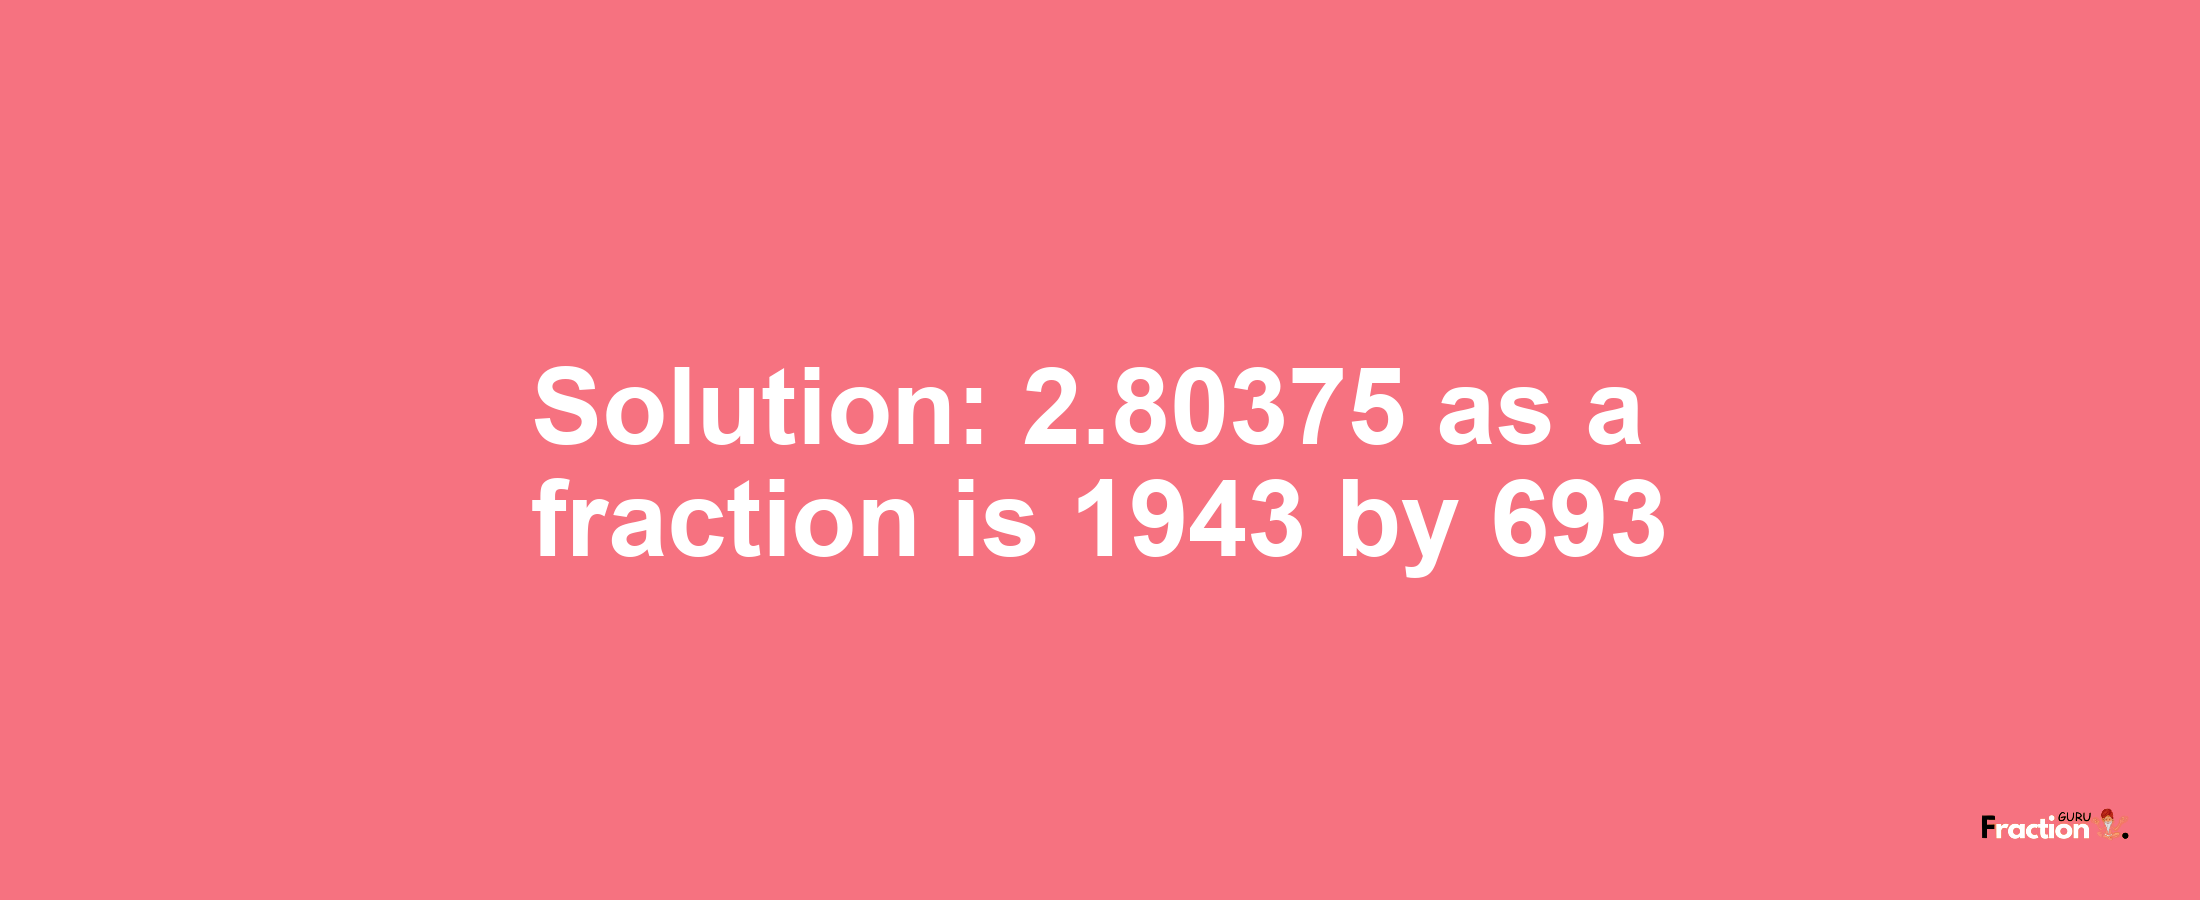 Solution:2.80375 as a fraction is 1943/693